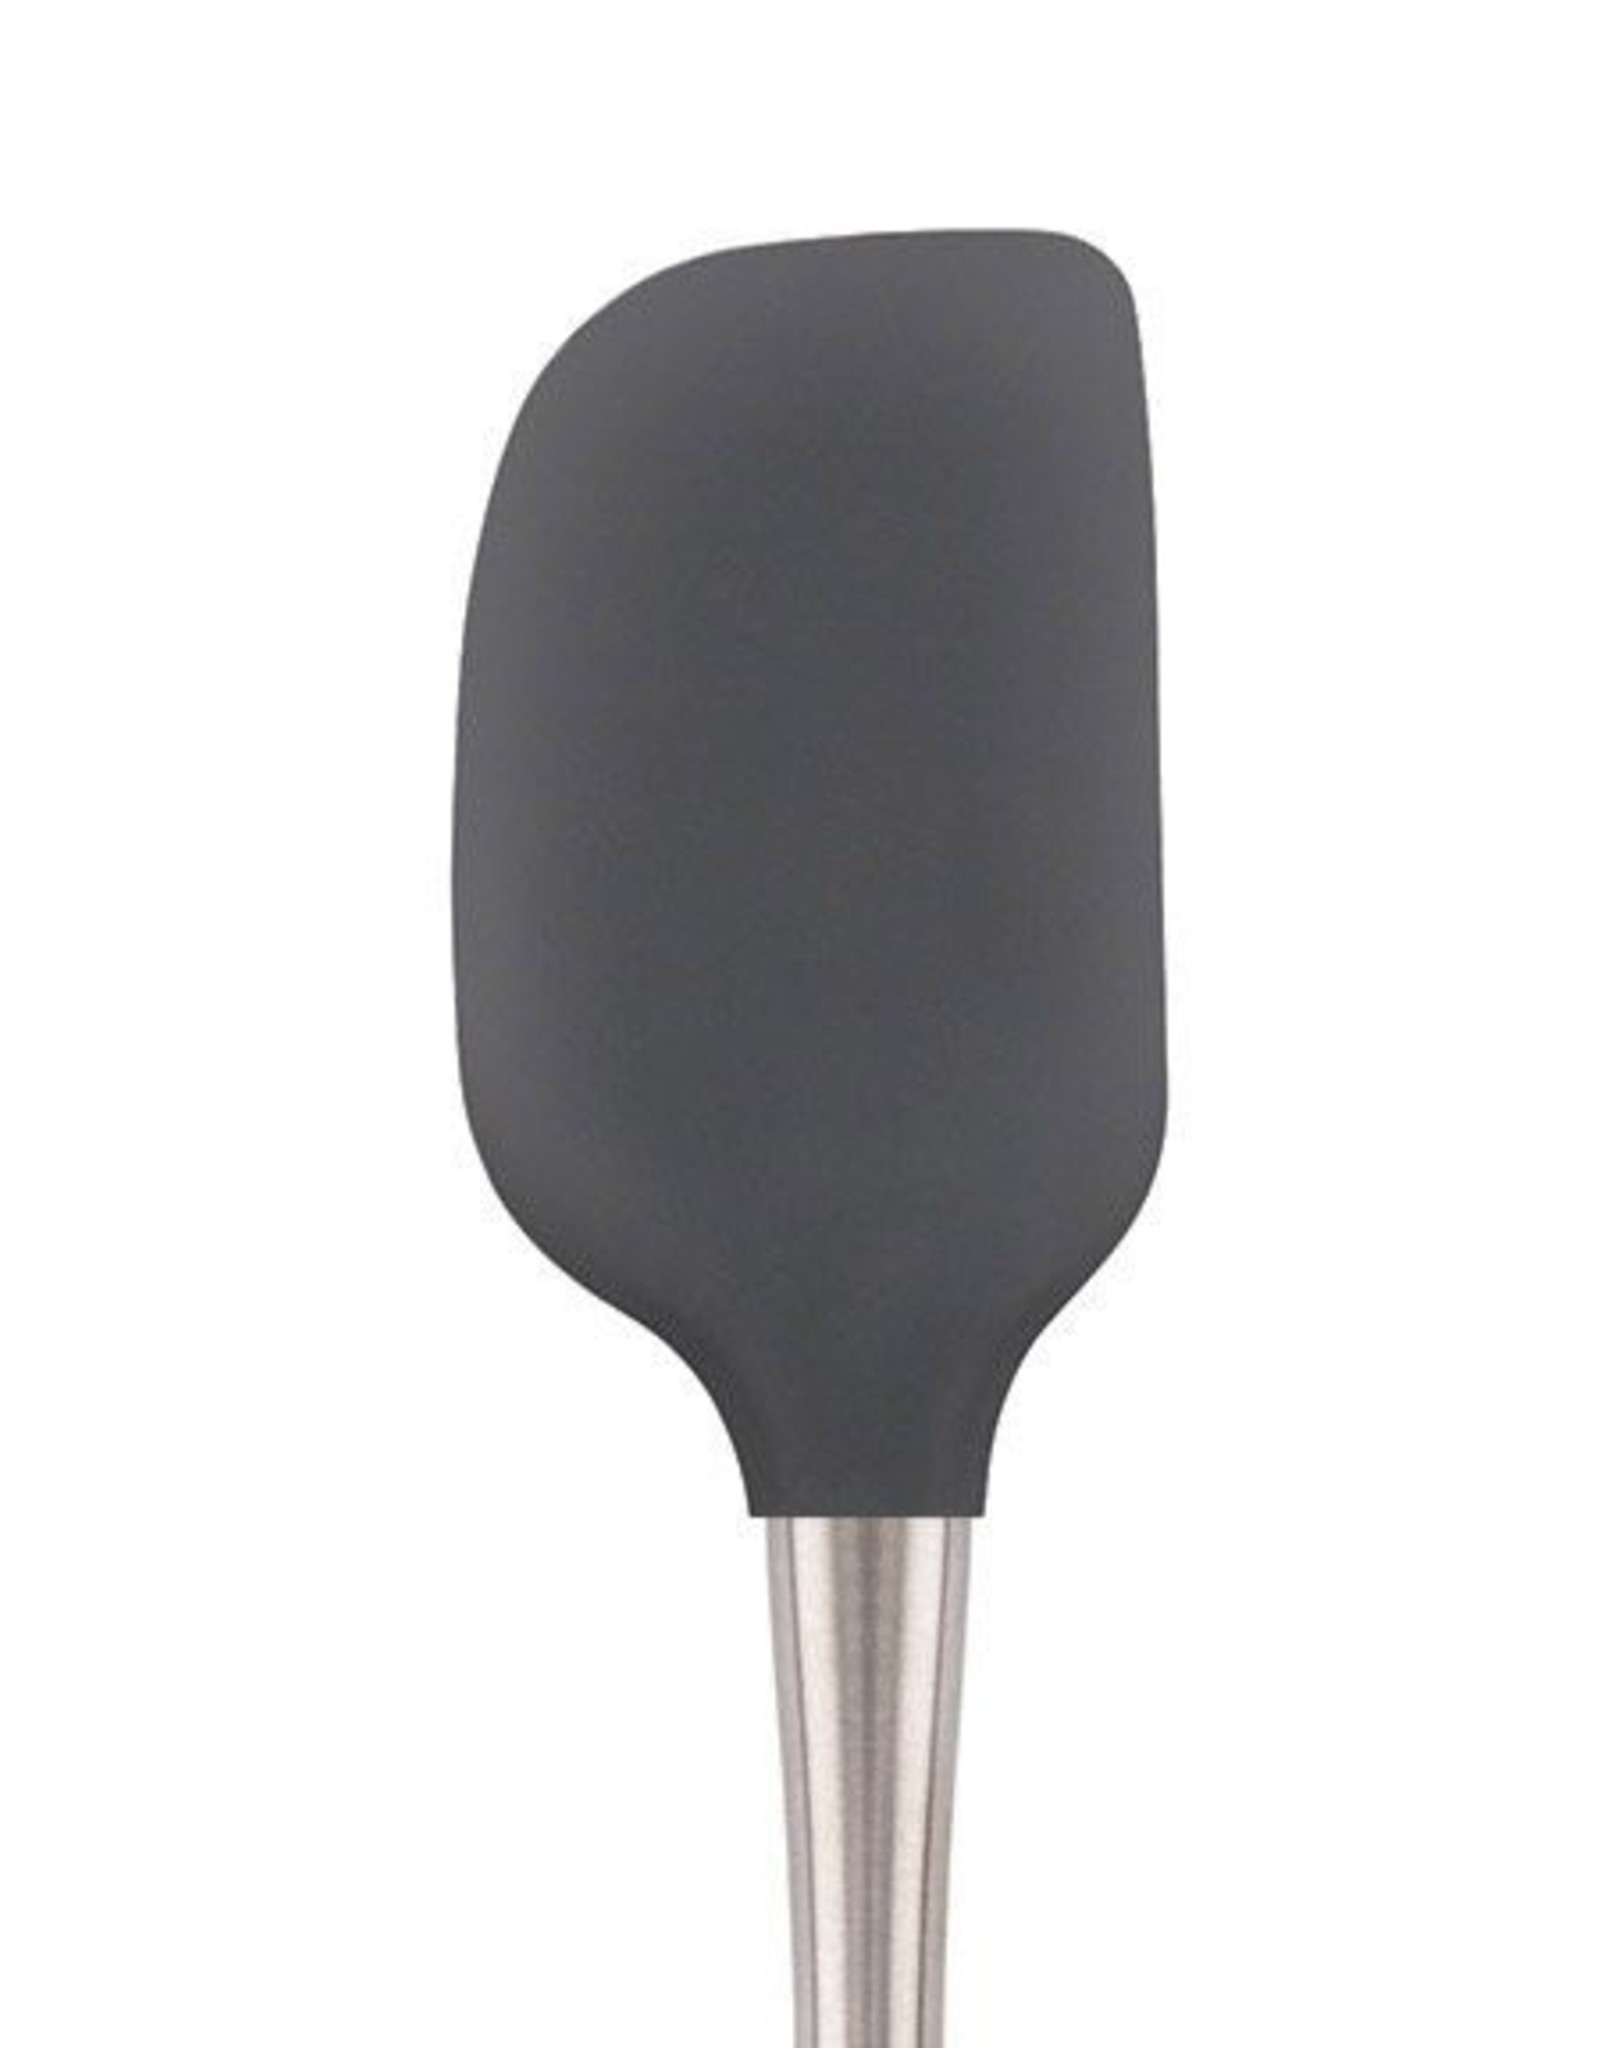 Flex Core Stainless Steel Spatula (Charcoal)